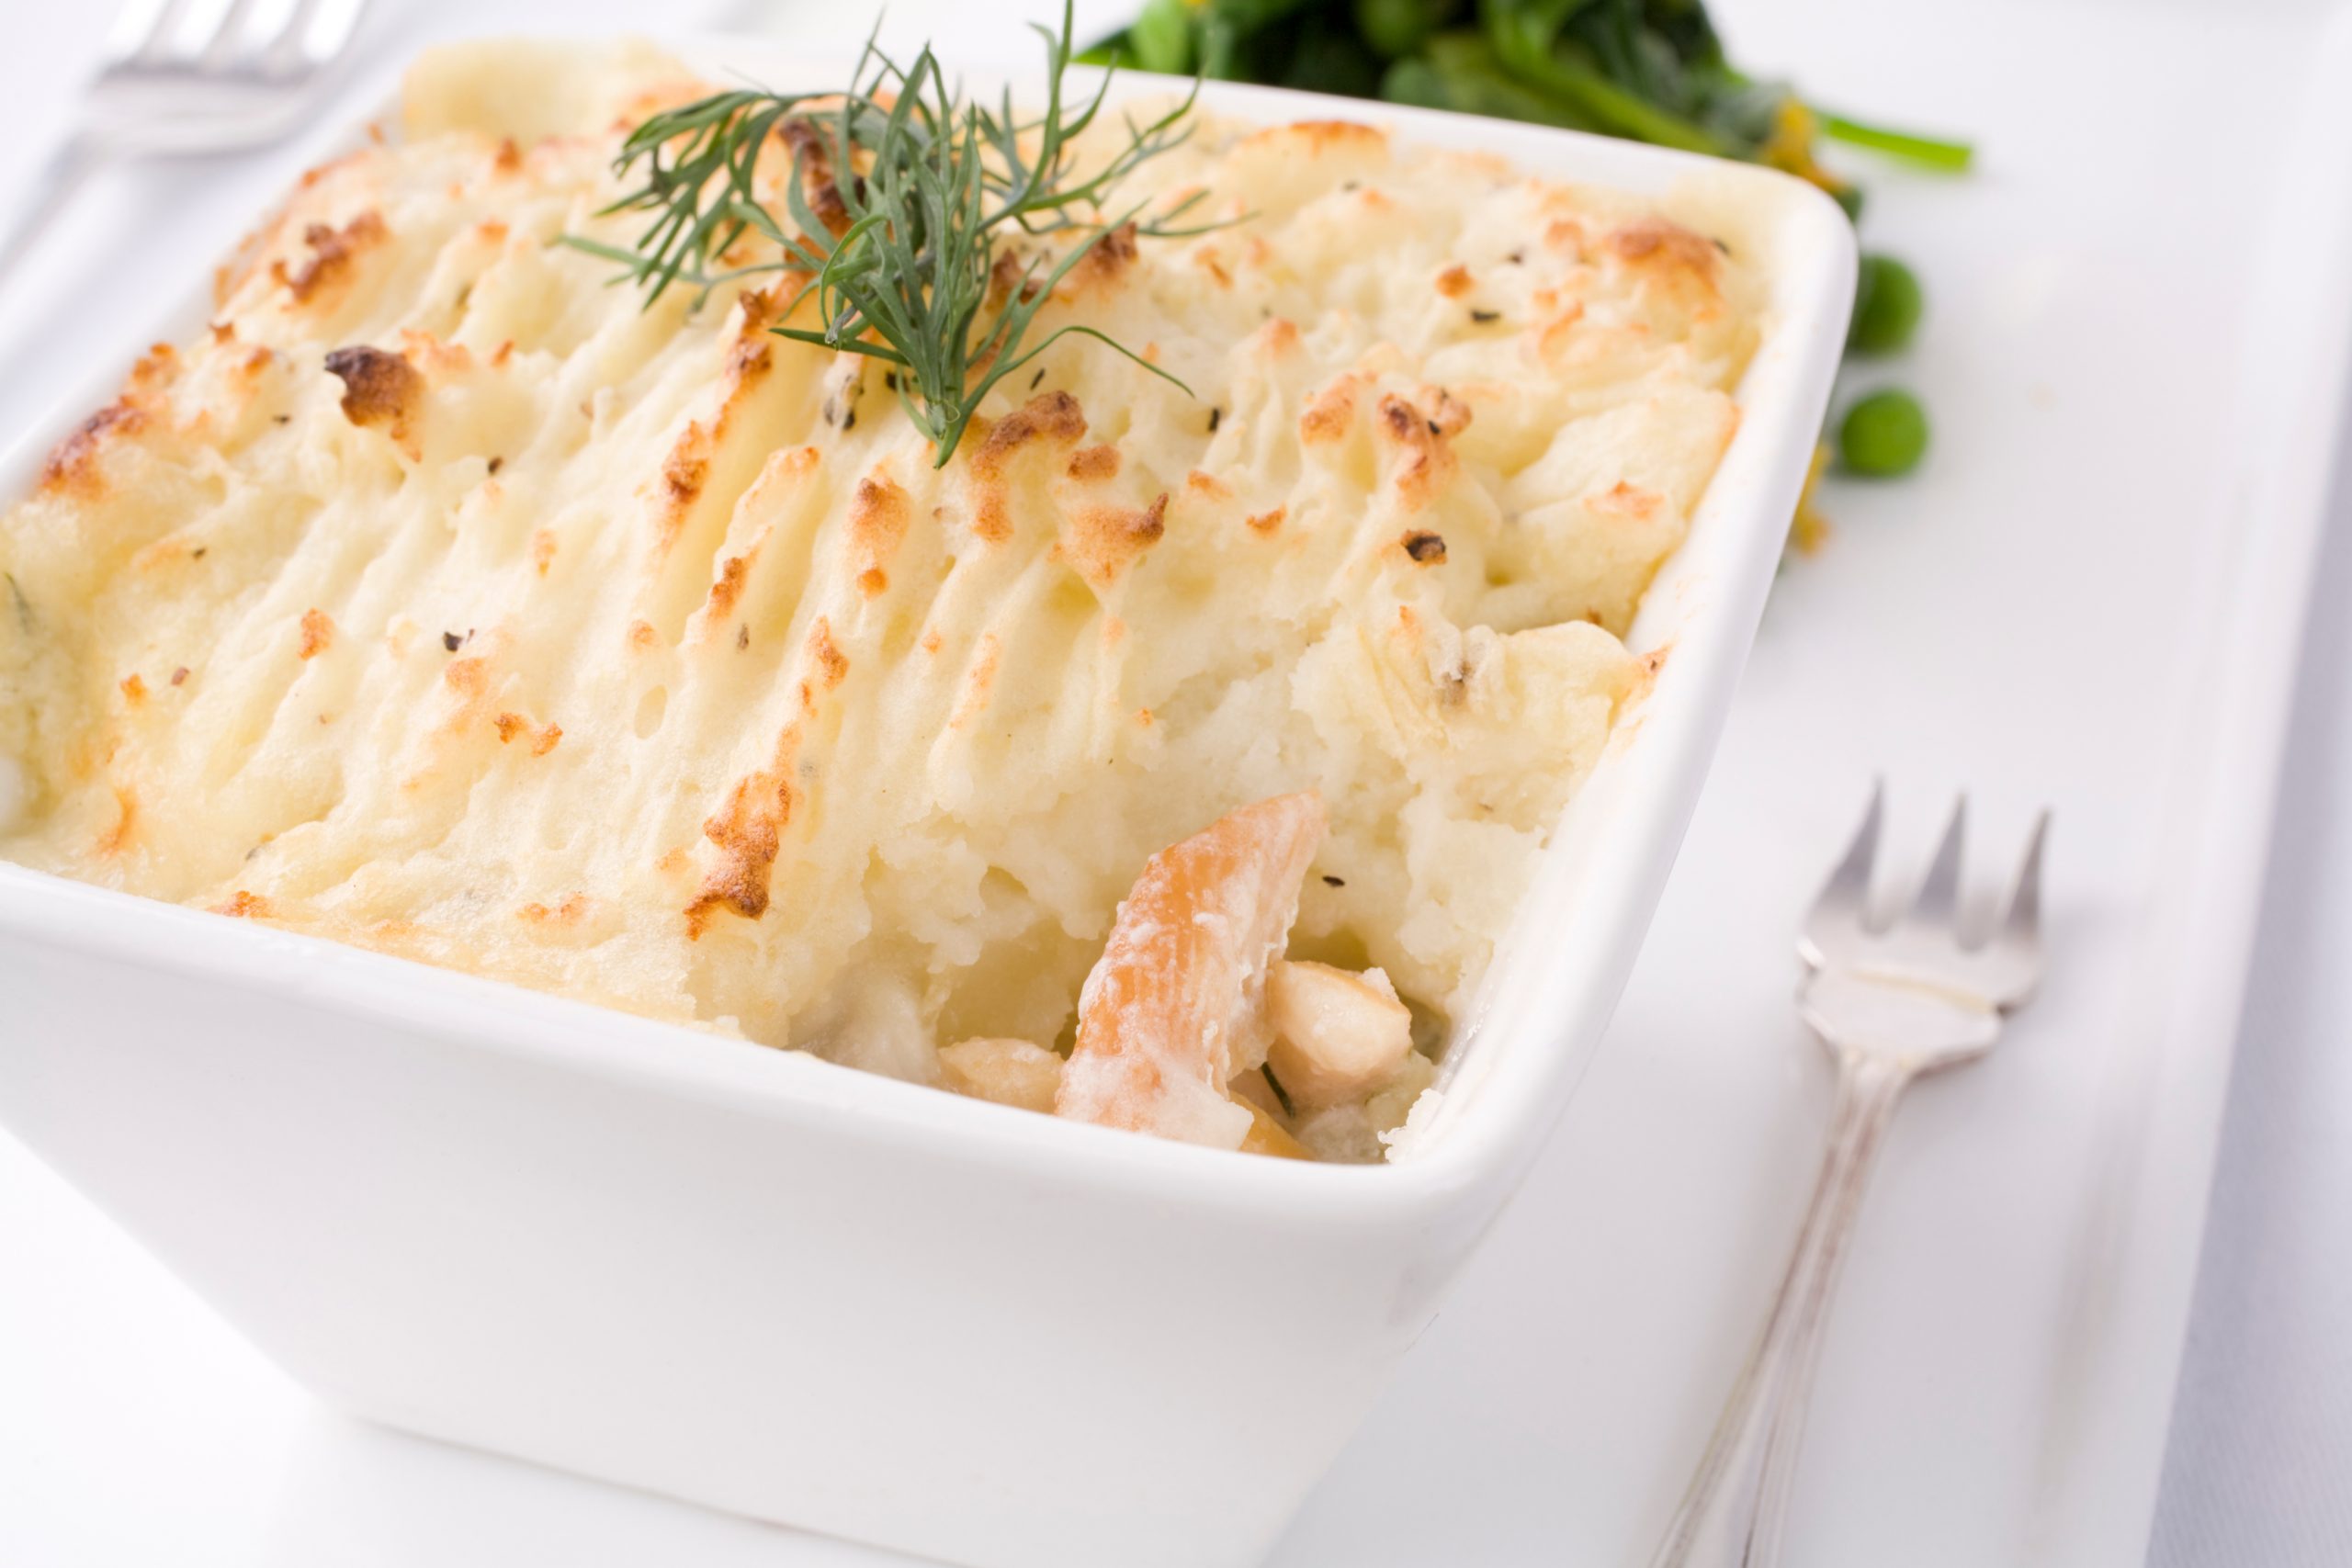 Smoked haddock and potato pie topped with mashed potato and garnished with dill